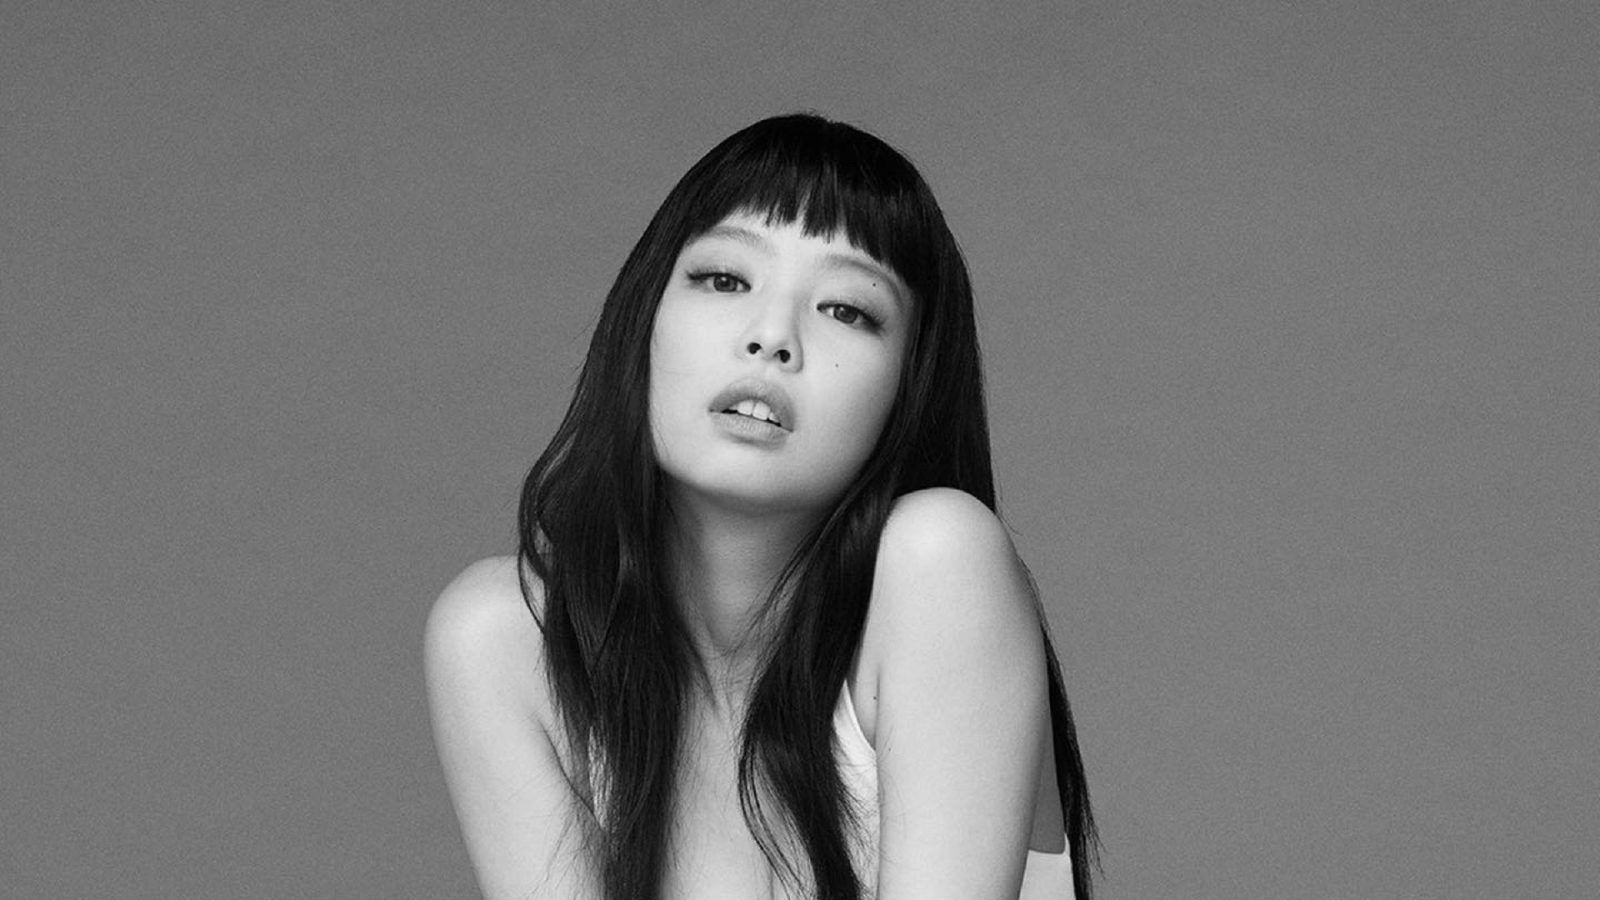 Calvin Klein releases a capsule collection with BLACKPINK's Jennie